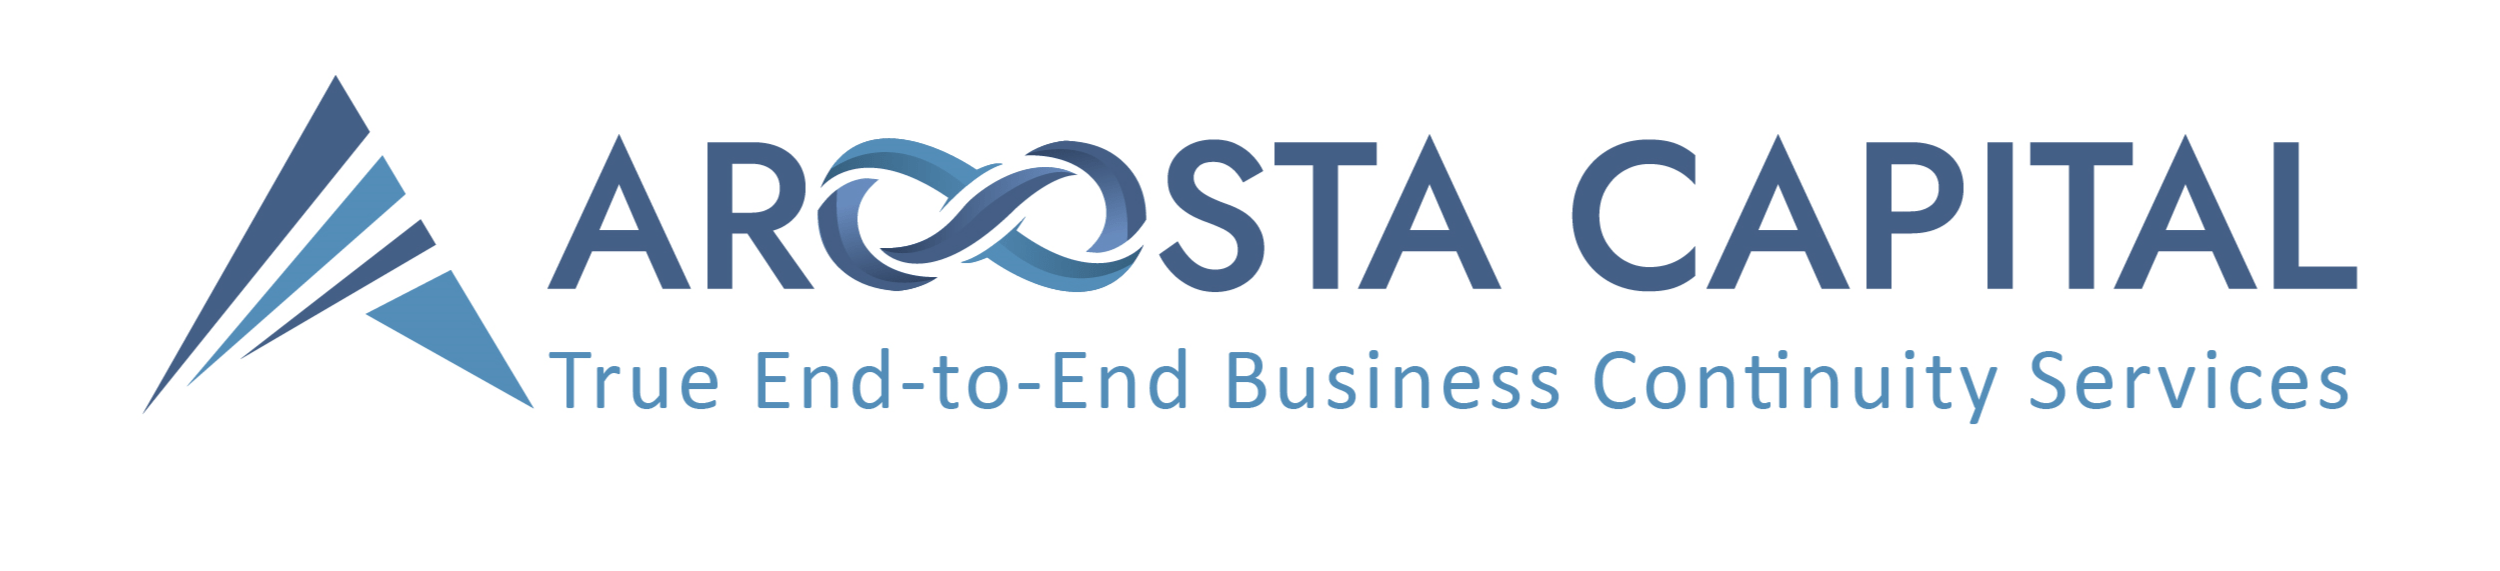 Logo of Aroosta Capital: True End-to-End Business Continuity Services 2